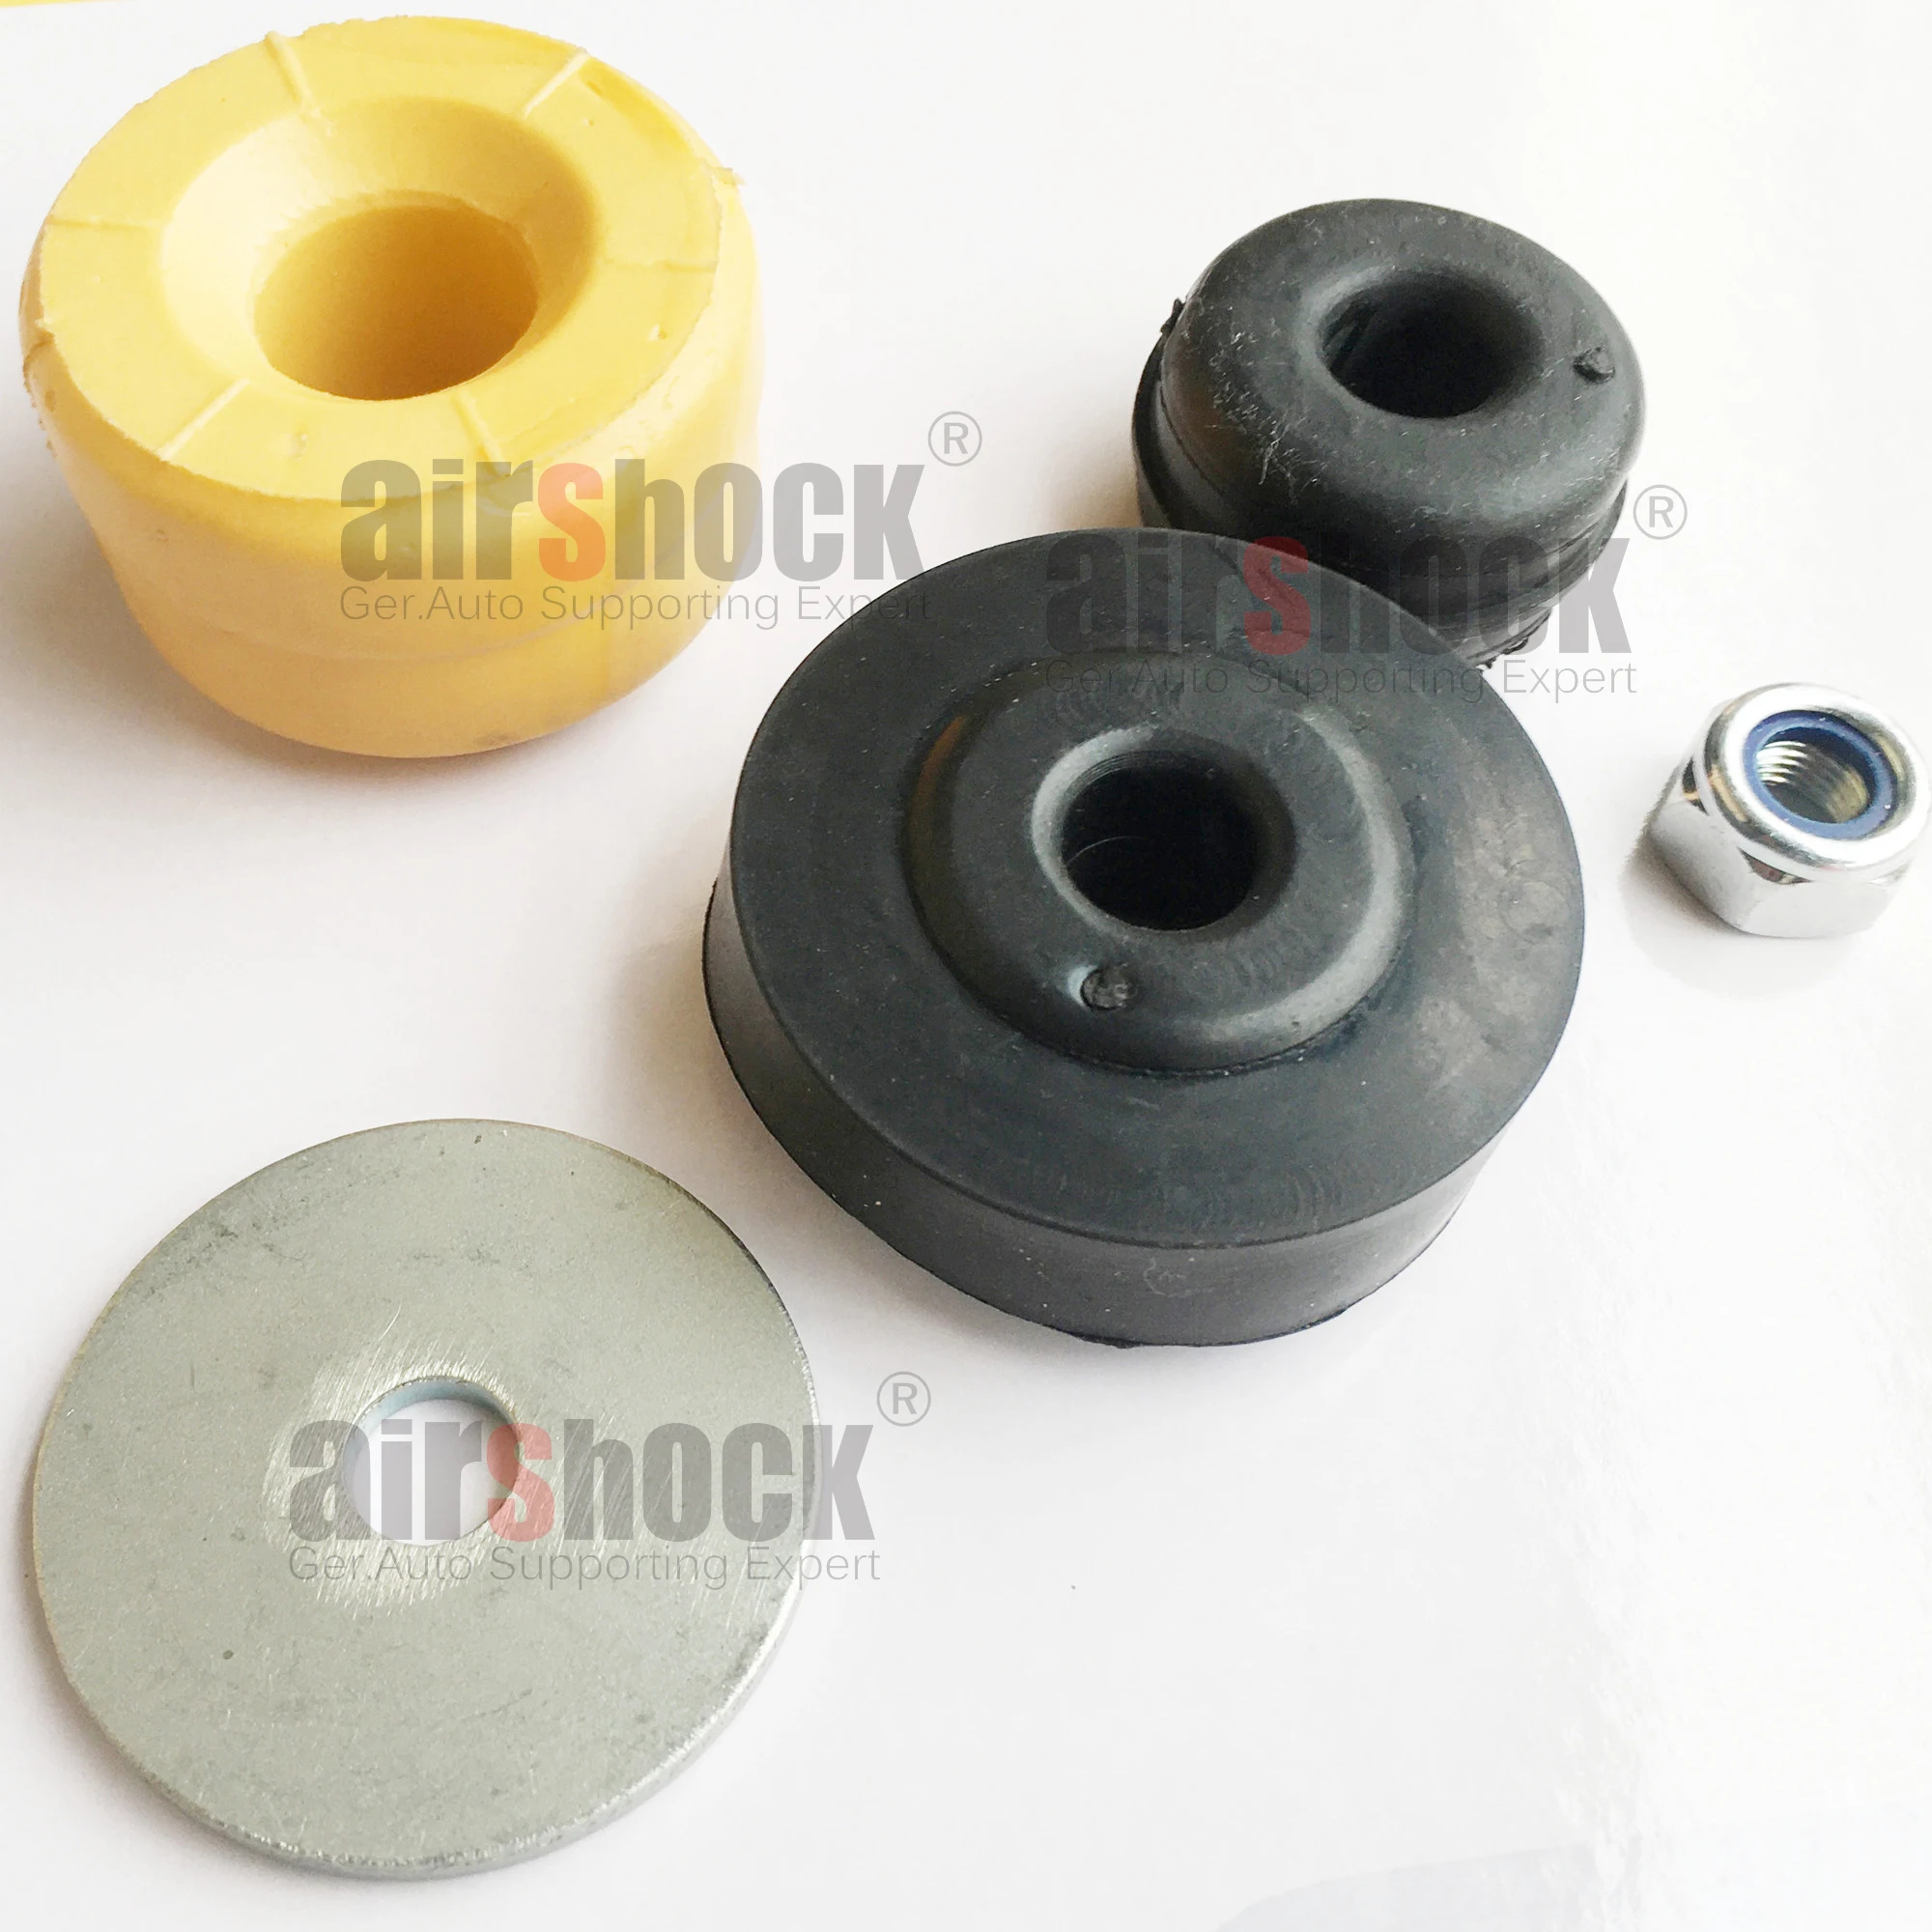 AirShock New Inside Rubber Dust Boot Rubber Cover Air Suspension Kits Fit  Mercedes-Benz W211 W219 Rear Shock Absorber - AliExpress